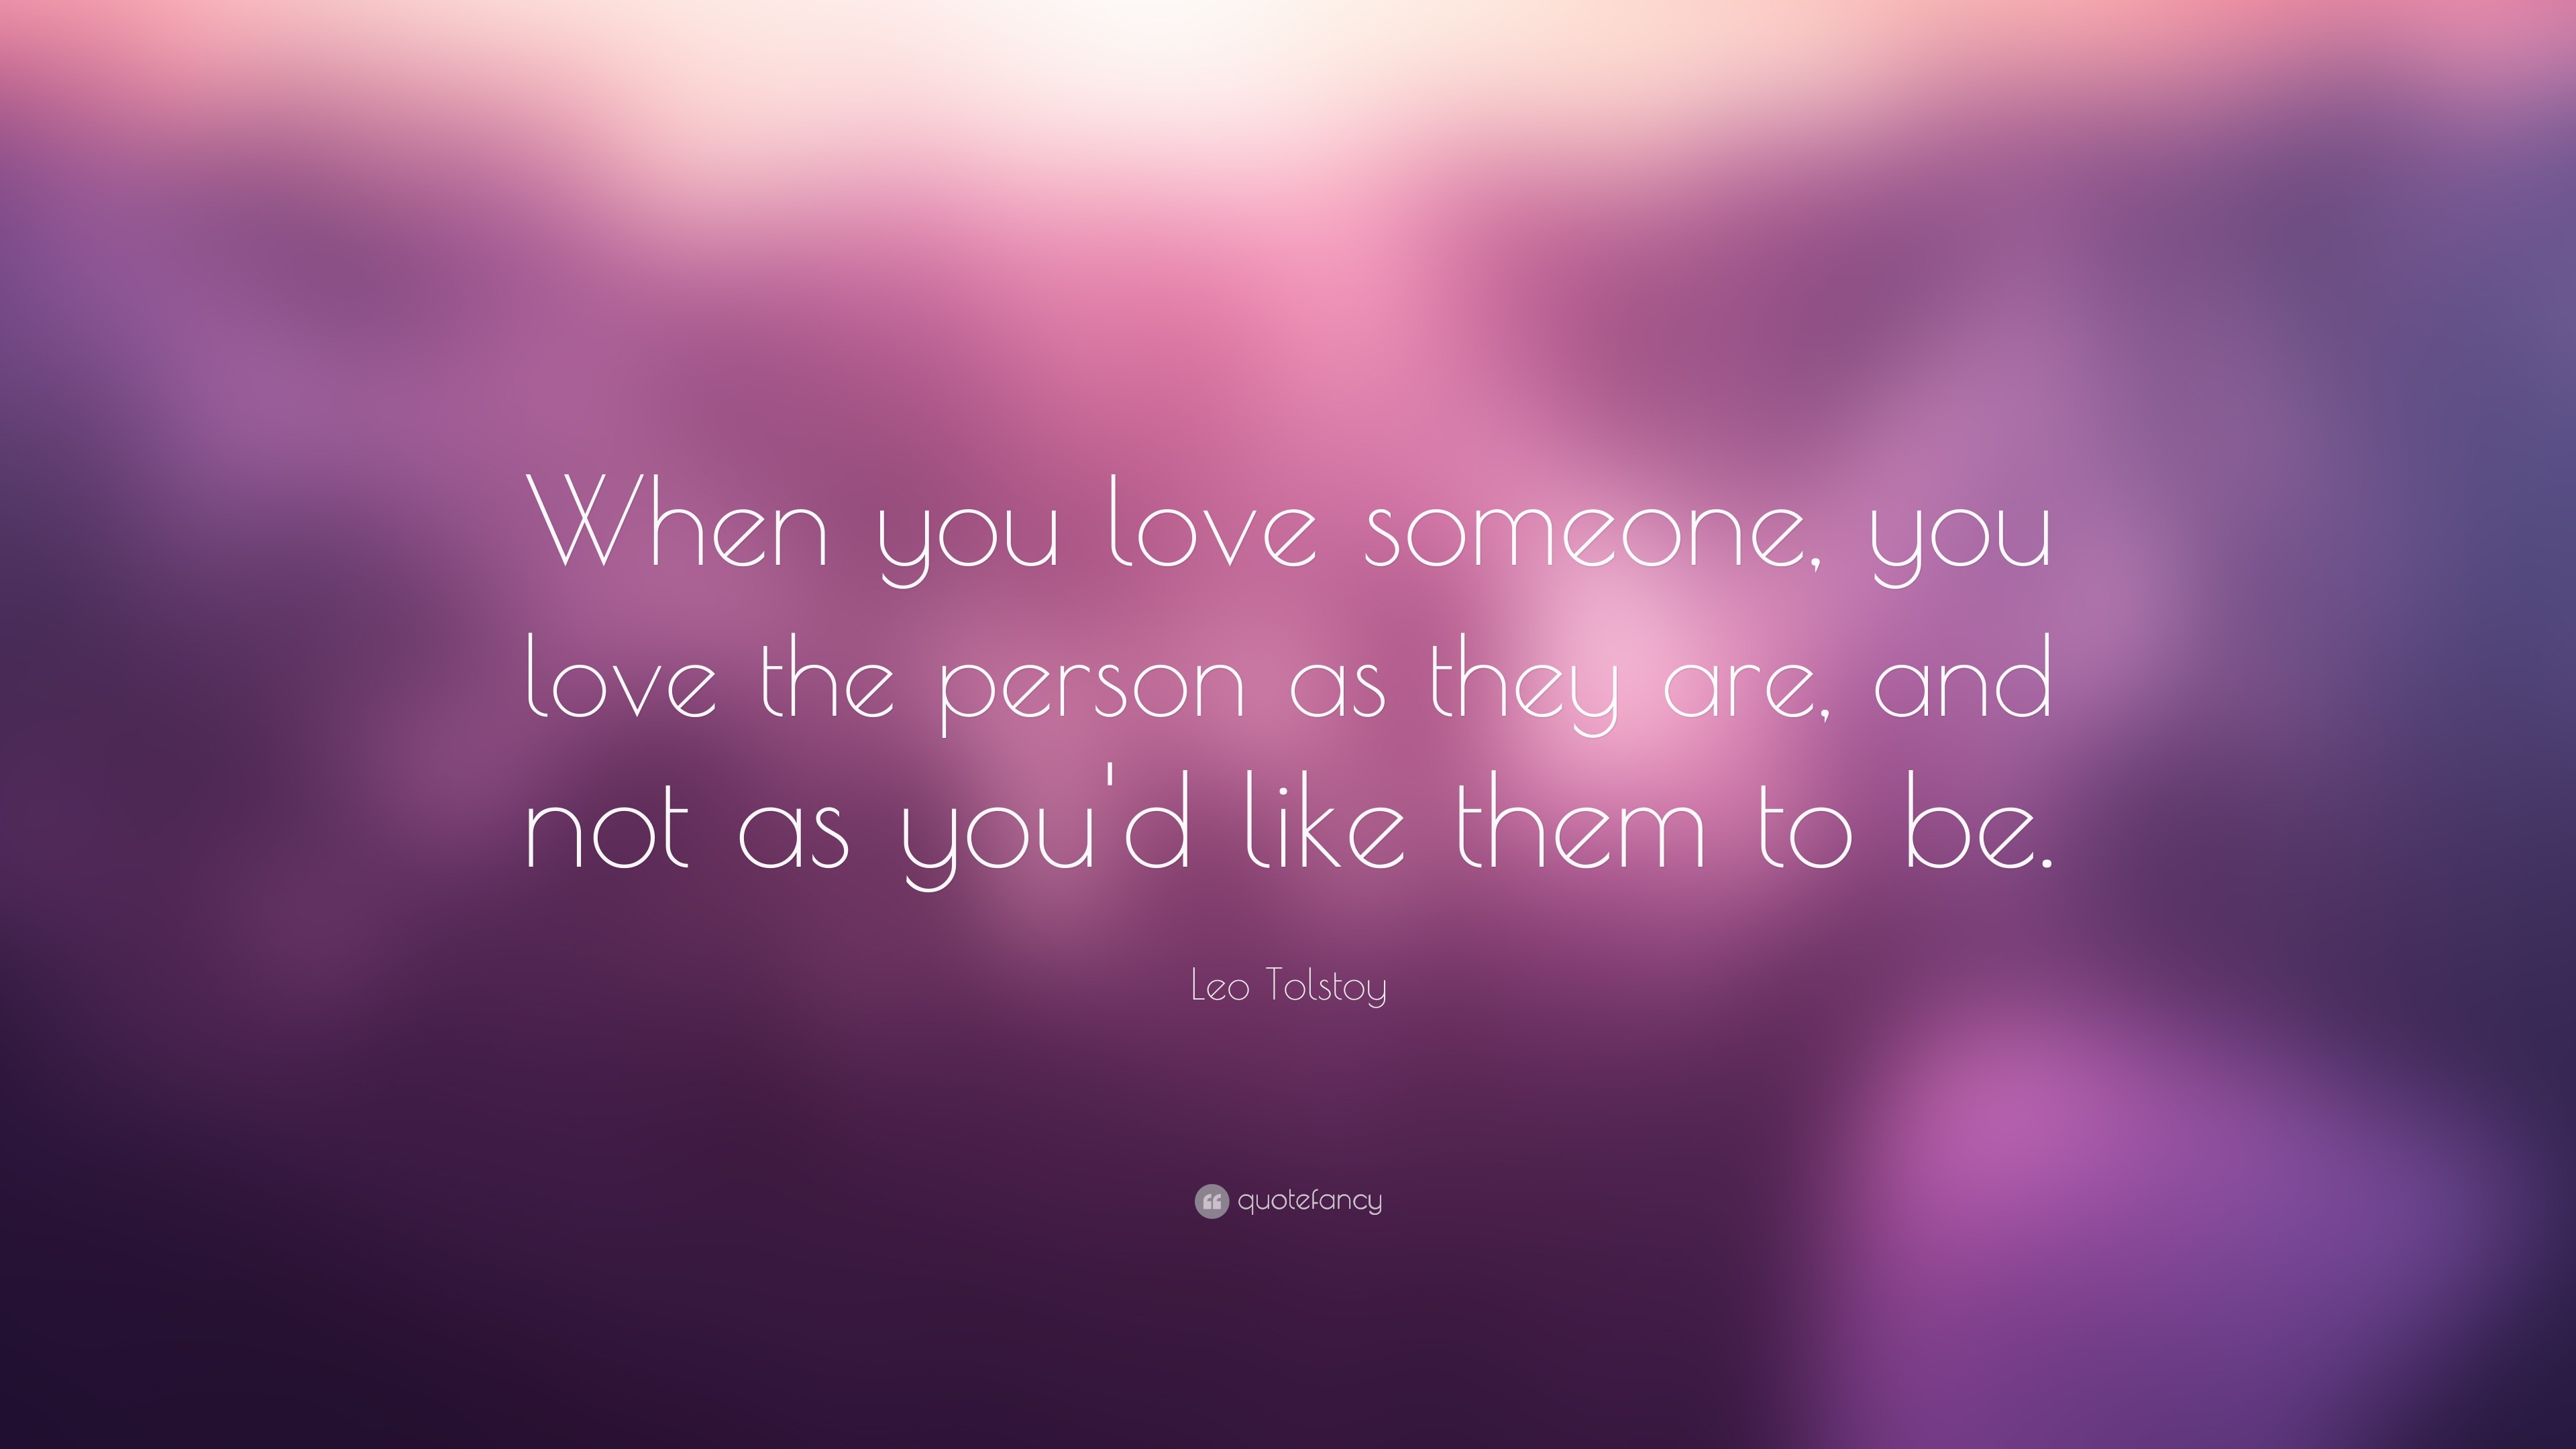 Leo Tolstoy Quote: “When you love someone, you love the person as they ...